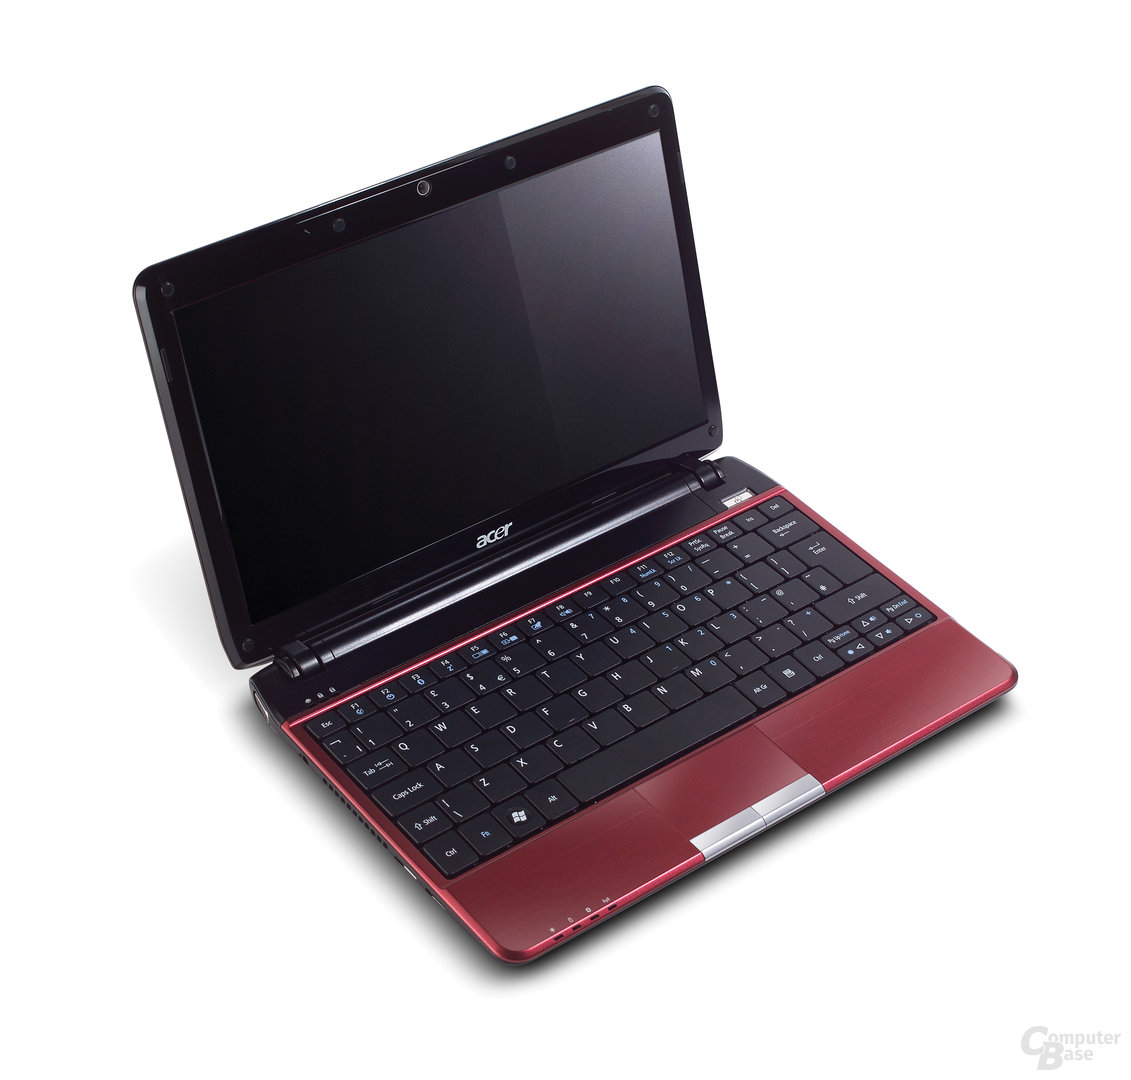 Acer Aspire 1810T in rot